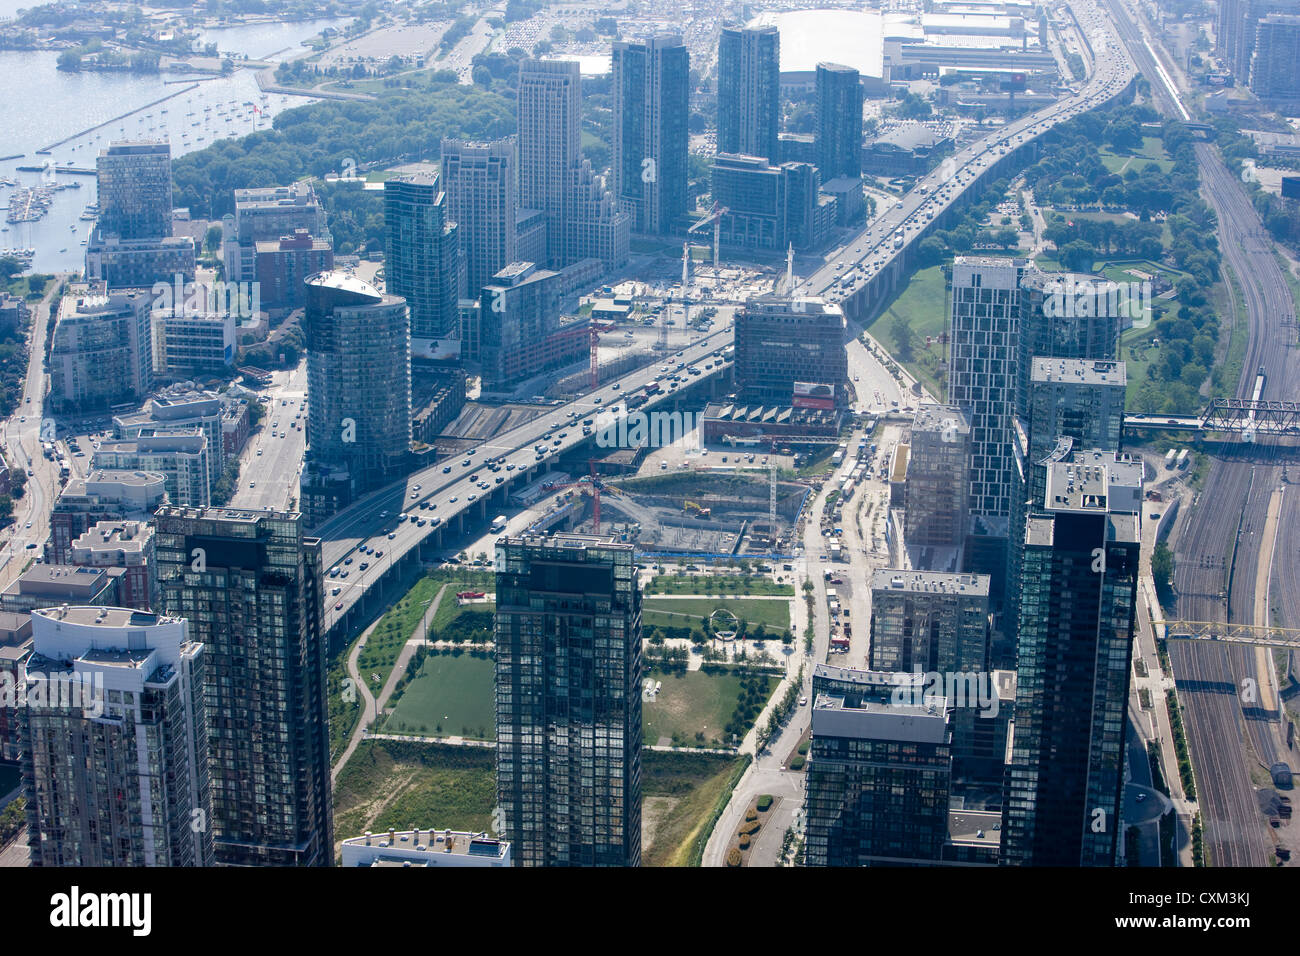 Downtown Toronto viewed from the top of the CN Tower Stock Photo